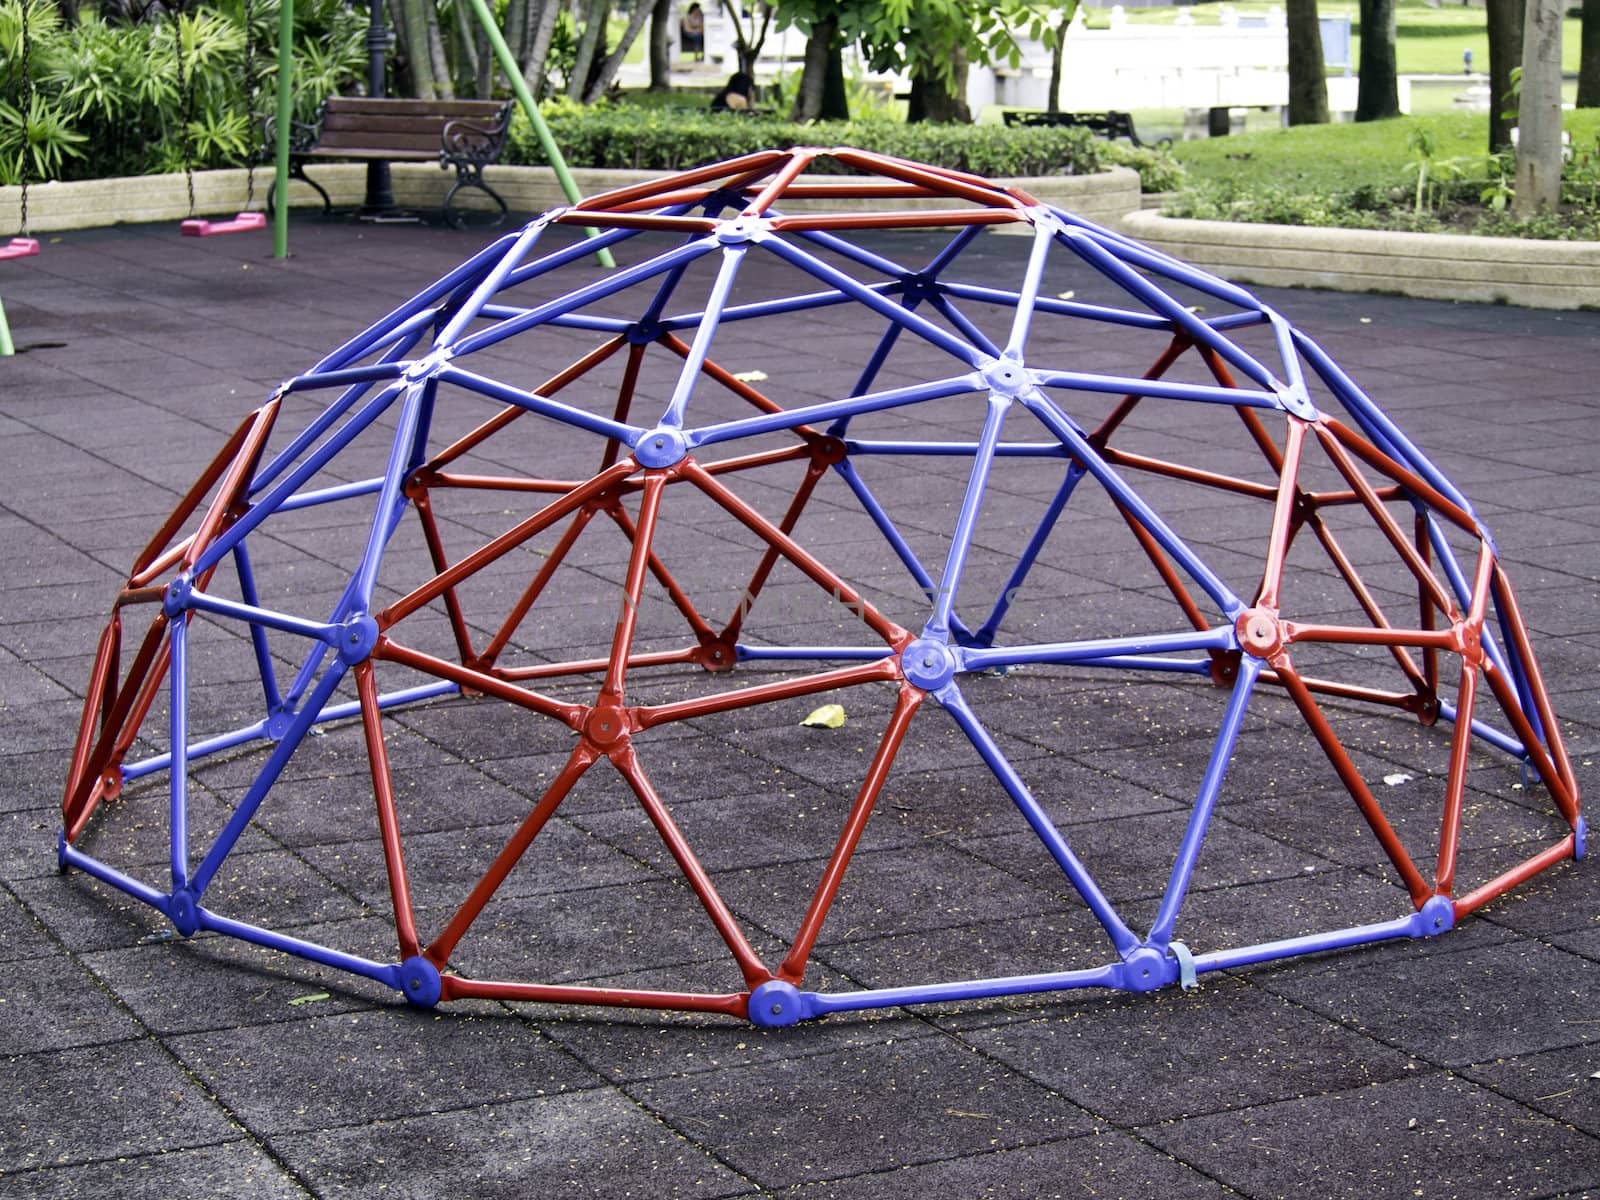 Colorful geodesic dome in schoolyard/playground